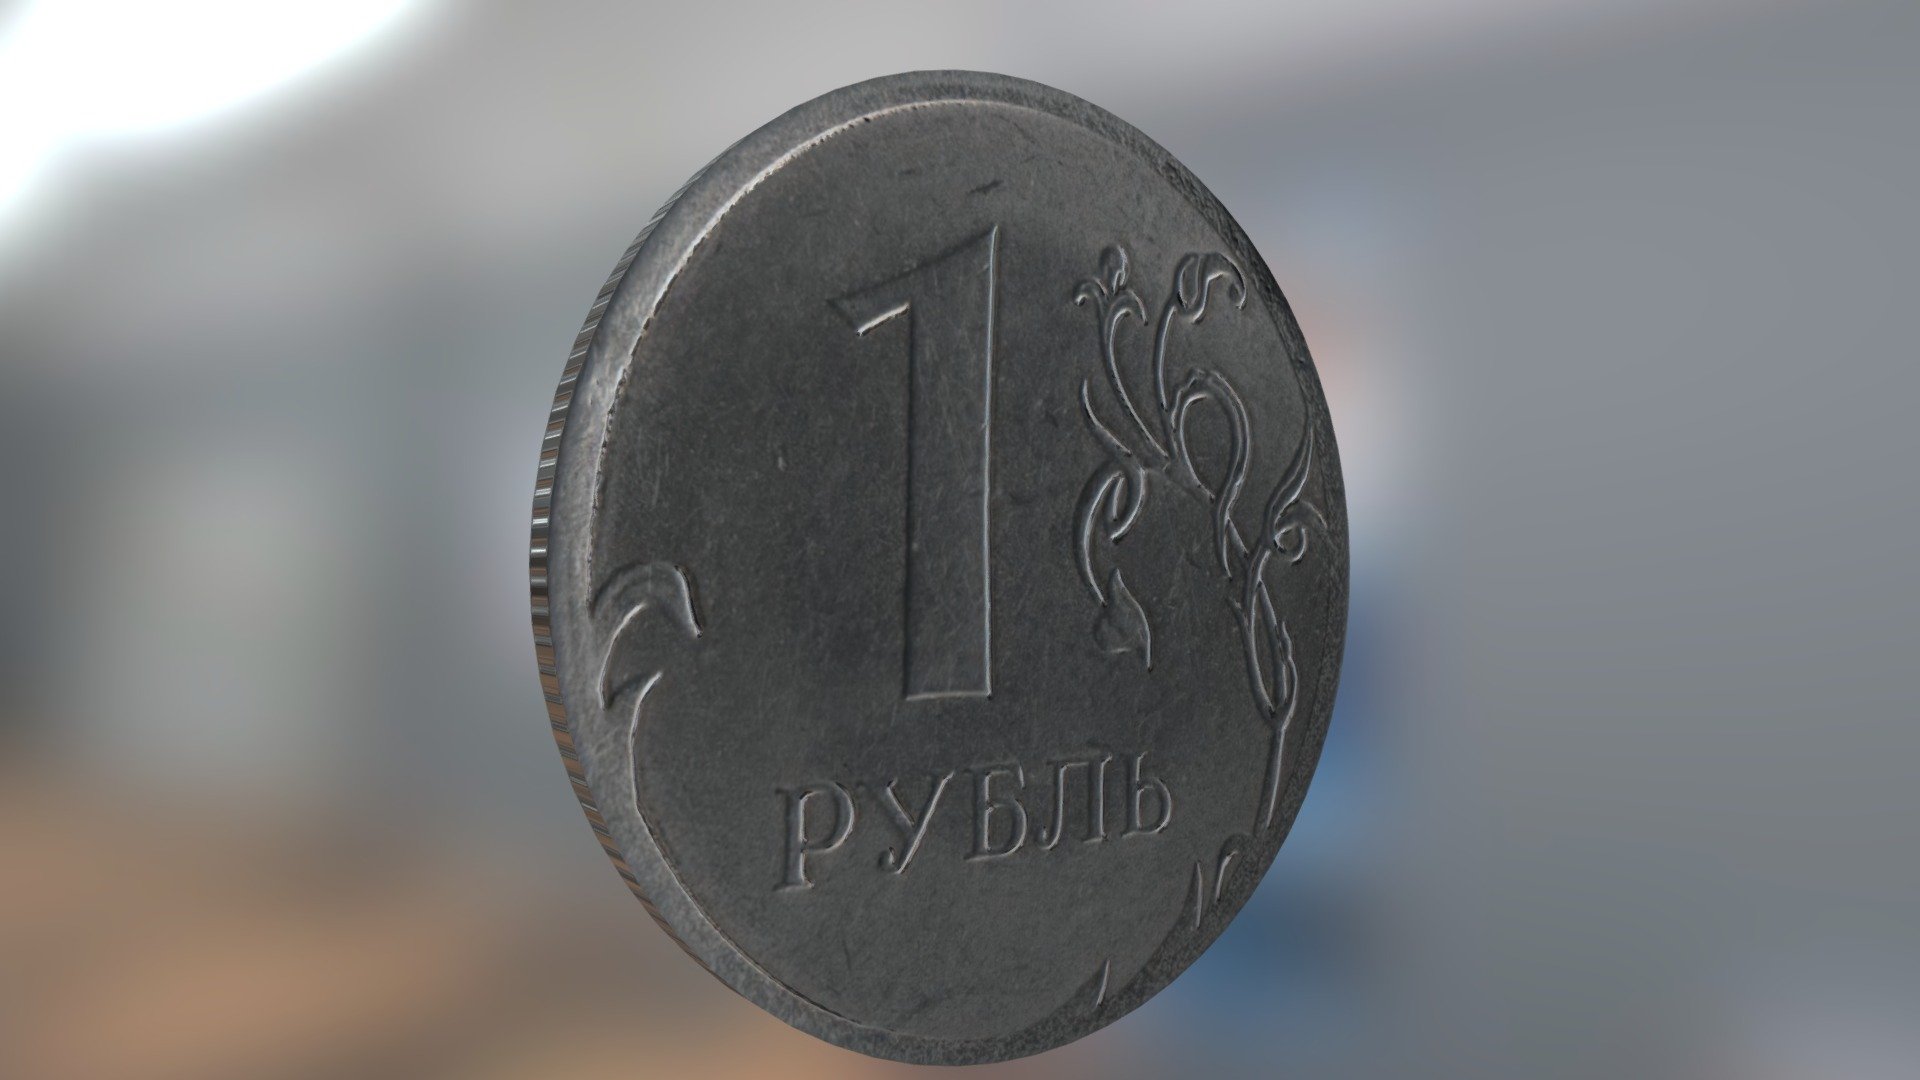 The Russian ruble or rouble (Russian: рубль rublʹ; symbol: ₽, руб; code: RUB) is the currency of the Russian Federation, the two partially recognised republics of Abkhazia and South Ossetia and the two unrecognised republics of Donetsk and Luhansk. The ruble is subdivided into 100 kopeks (sometimes written as kopecks or copecks; Russian: копе́йка kopeyka, plural: копе́йки kopeyki).

The ruble was the currency of the Russian Empire and of the Soviet Union (as the Soviet ruble). However, today only Russia, Belarus and Transnistria use currencies with the same name. The ruble was the first currency in Europe to be decimalised, in 1704, when the ruble became equal to 100 kopeks.

In September 1993, the Soviet ruble (code: SUR) was replaced with the Russian ruble (code: RUR) at the rate 1 SUR = 1 RUR. In 1998, preceding the financial crisis, the Russian ruble was redenominated with the new code &ldquo;RUB